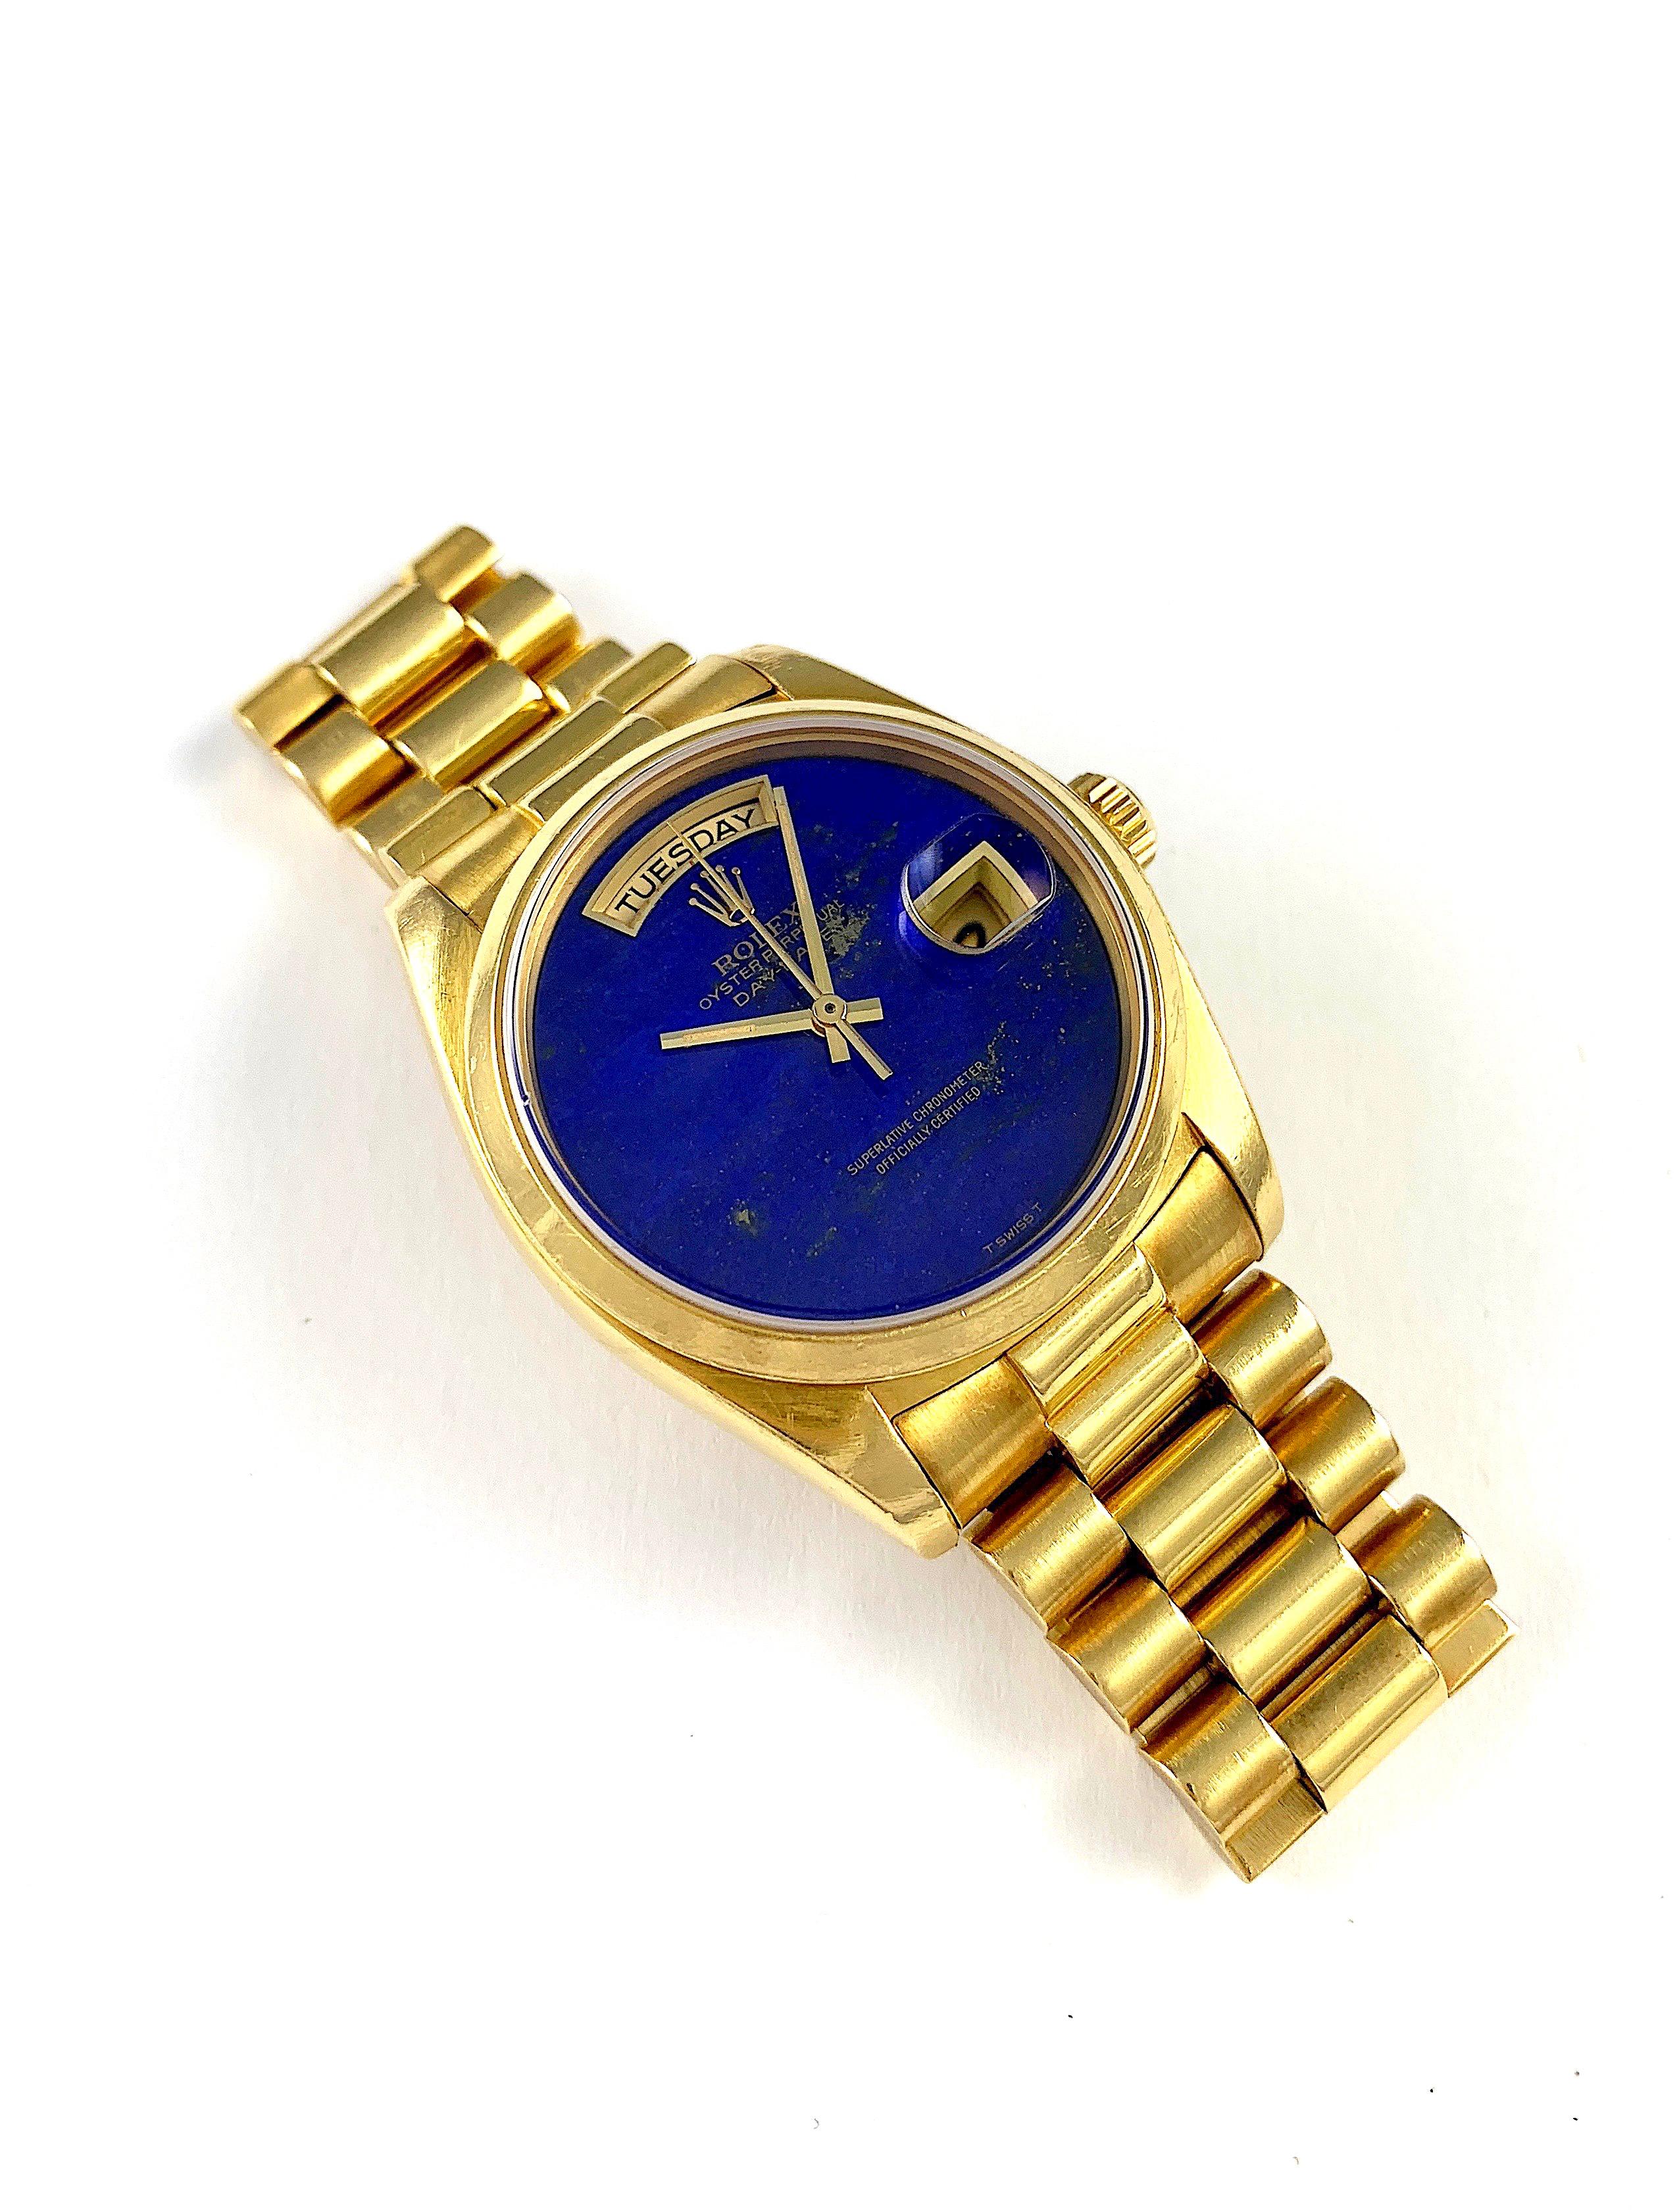 Rolex 18K Yellow Gold Day-Date Presidential Watch
Rare Factory Rolex Lapis Lazuli Dial Without Hour Markers
Lapis Is One Of The Rarest Rolex Stone Dials Produced
The Dial Has a Small Crack Seen with A Loupe and Under Magnification at Eleven O'clock